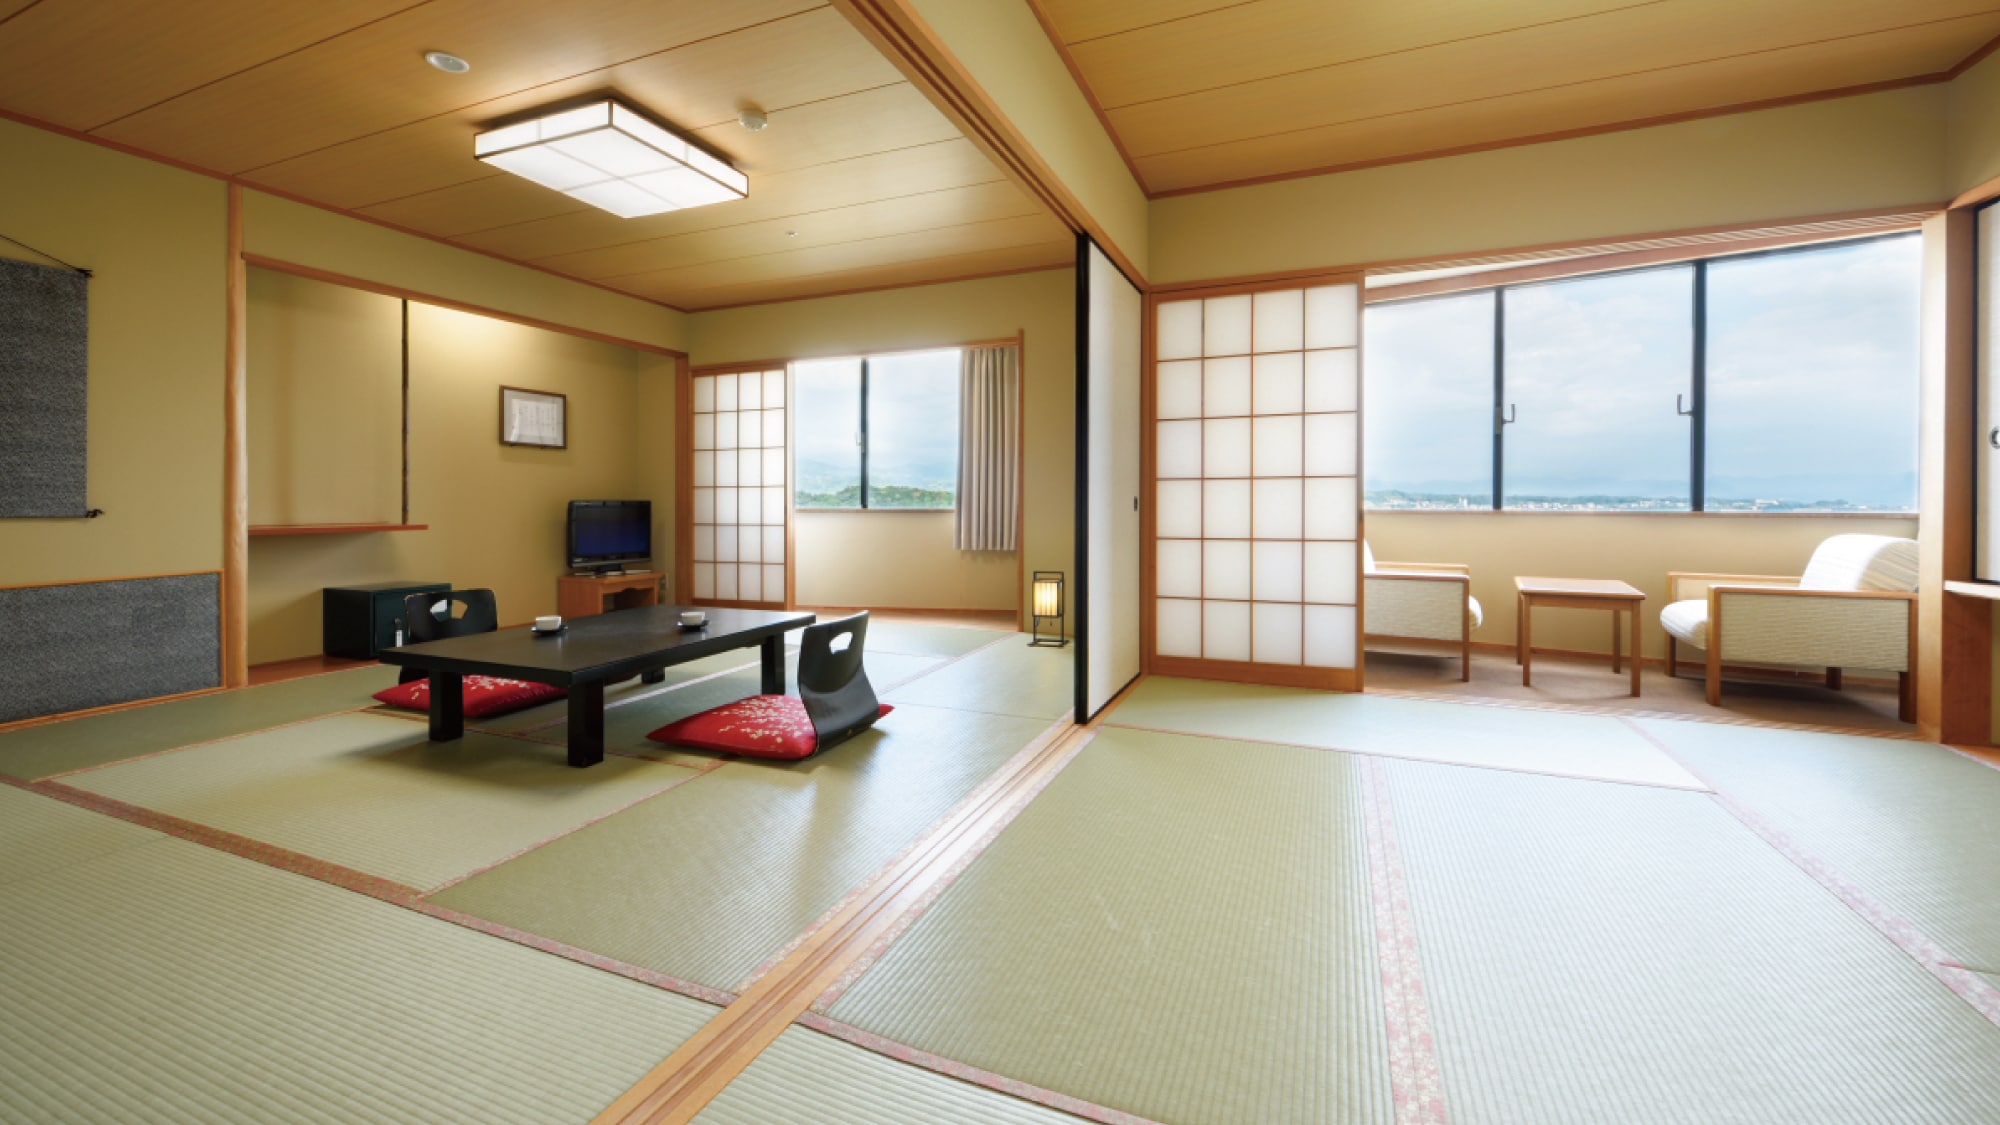 [Deluxe Japanese-style room] 10 tatami mats + 6 tatami mats for 2 consecutive rooms. Please relax in a calm atmosphere.